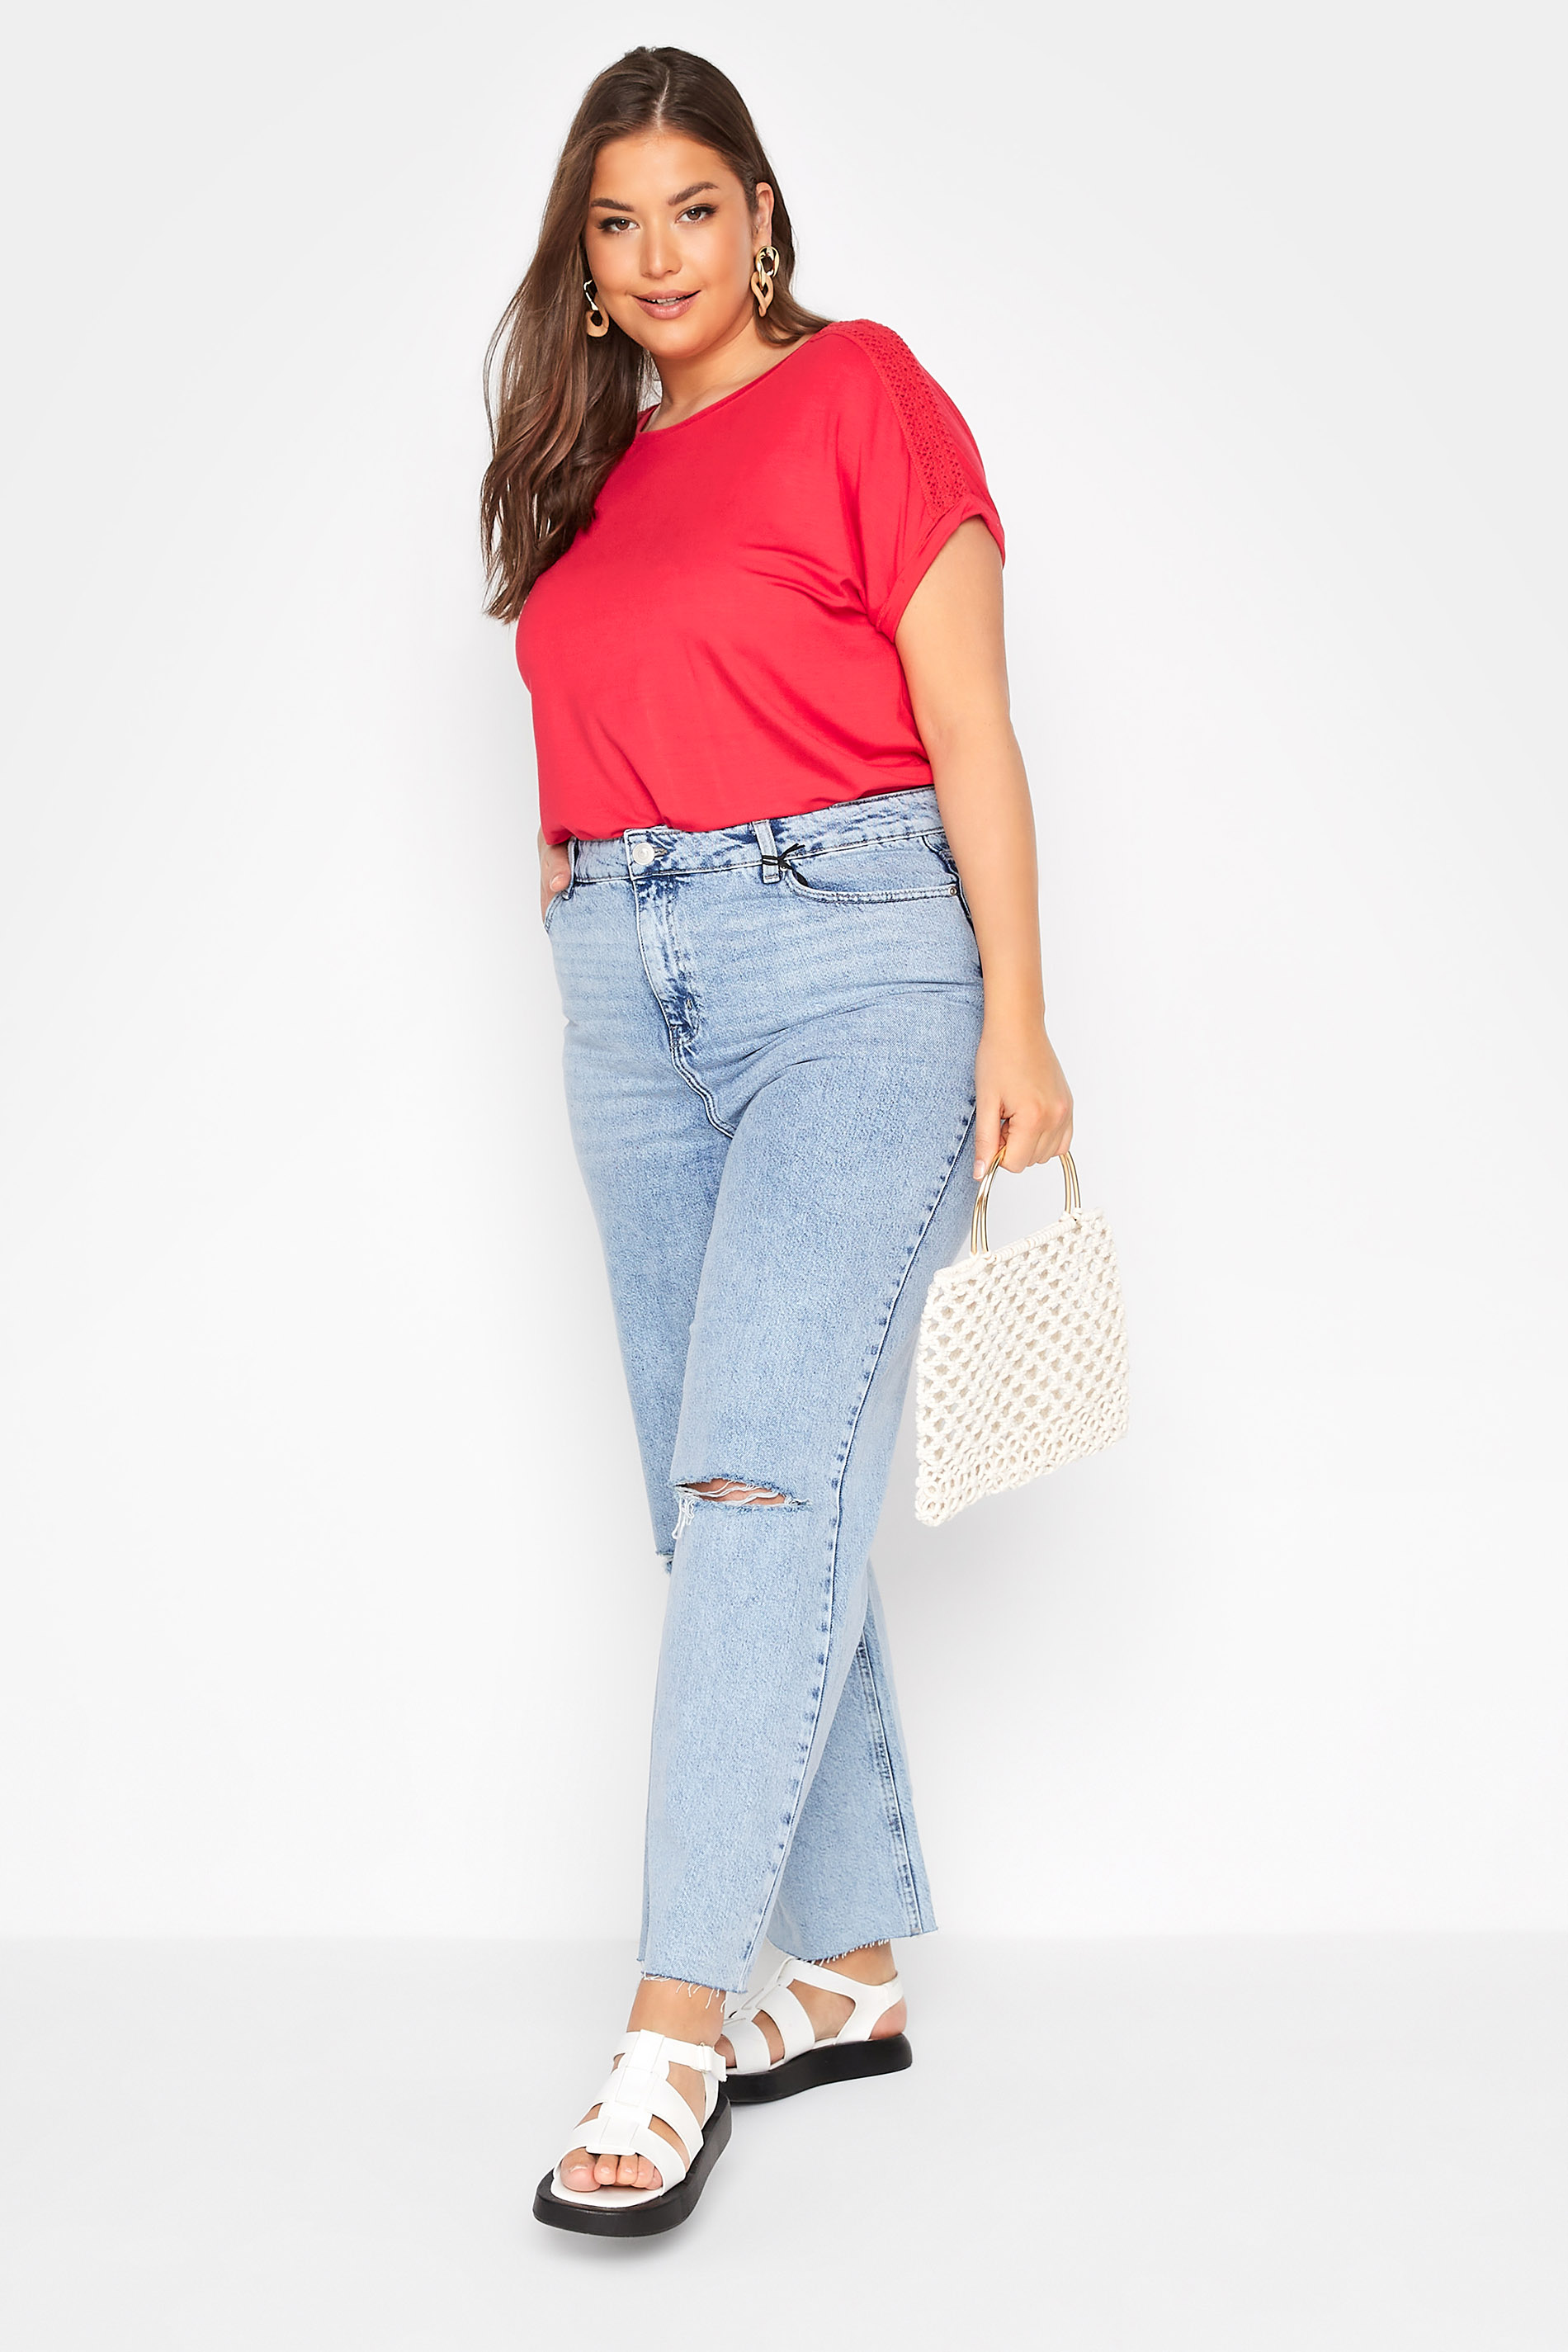 Grande taille  Tops Grande taille  T-Shirts | T-Shirt Rouge en Jersey - WT75489